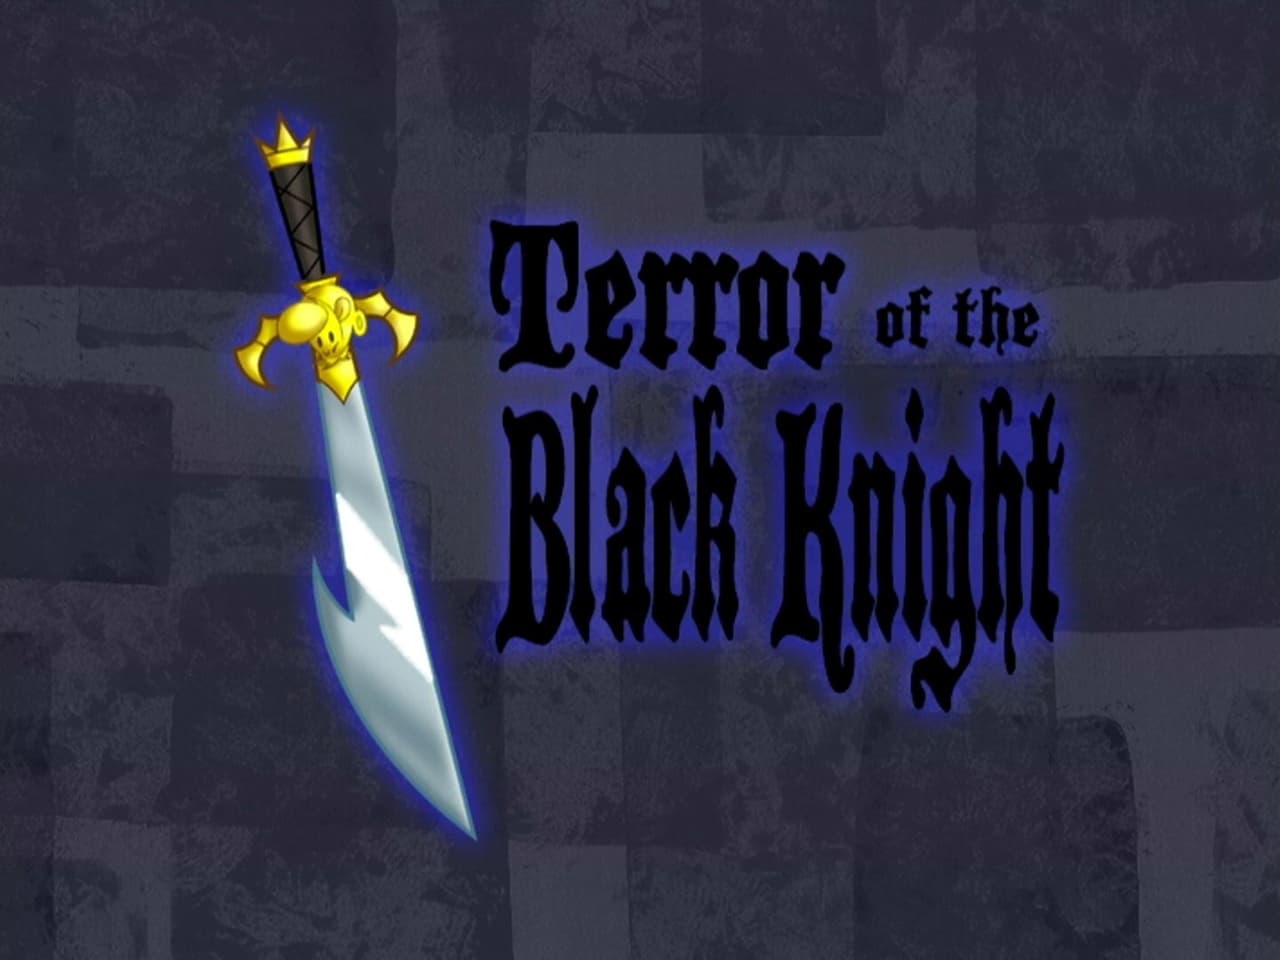 The Grim Adventures of Billy and Mandy - Season 2 Episode 21 : Terror of the Black Knight